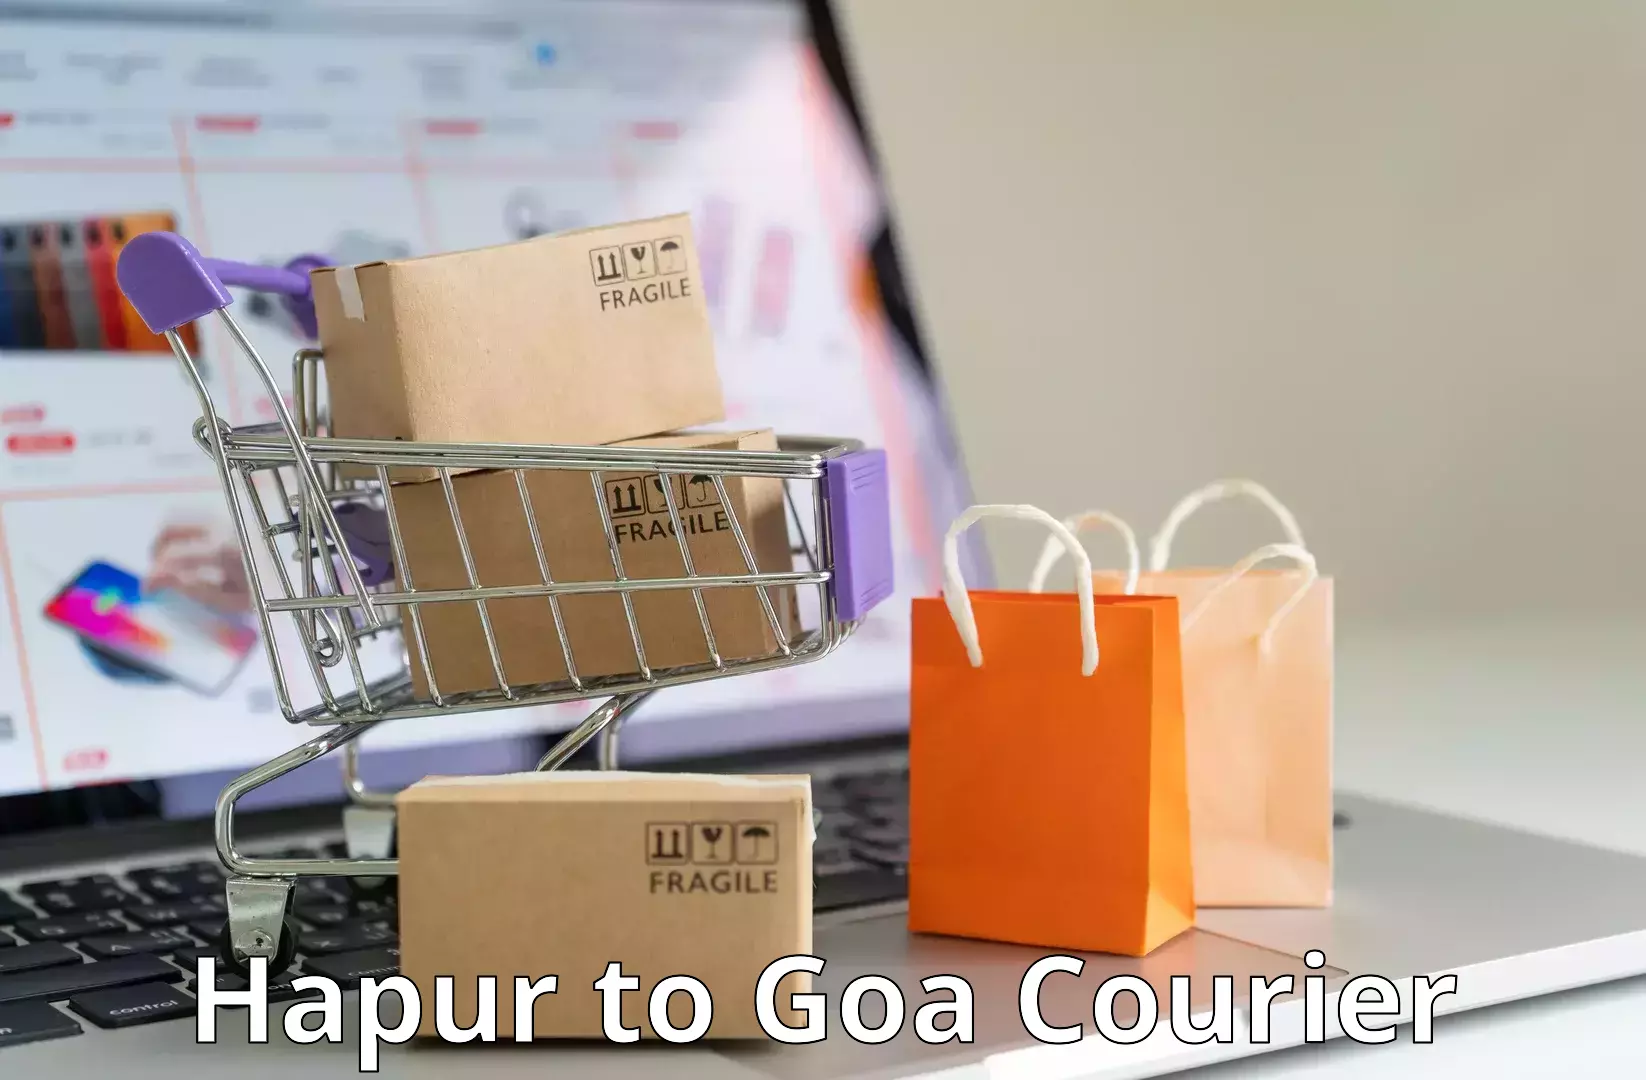 Express delivery capabilities Hapur to Goa